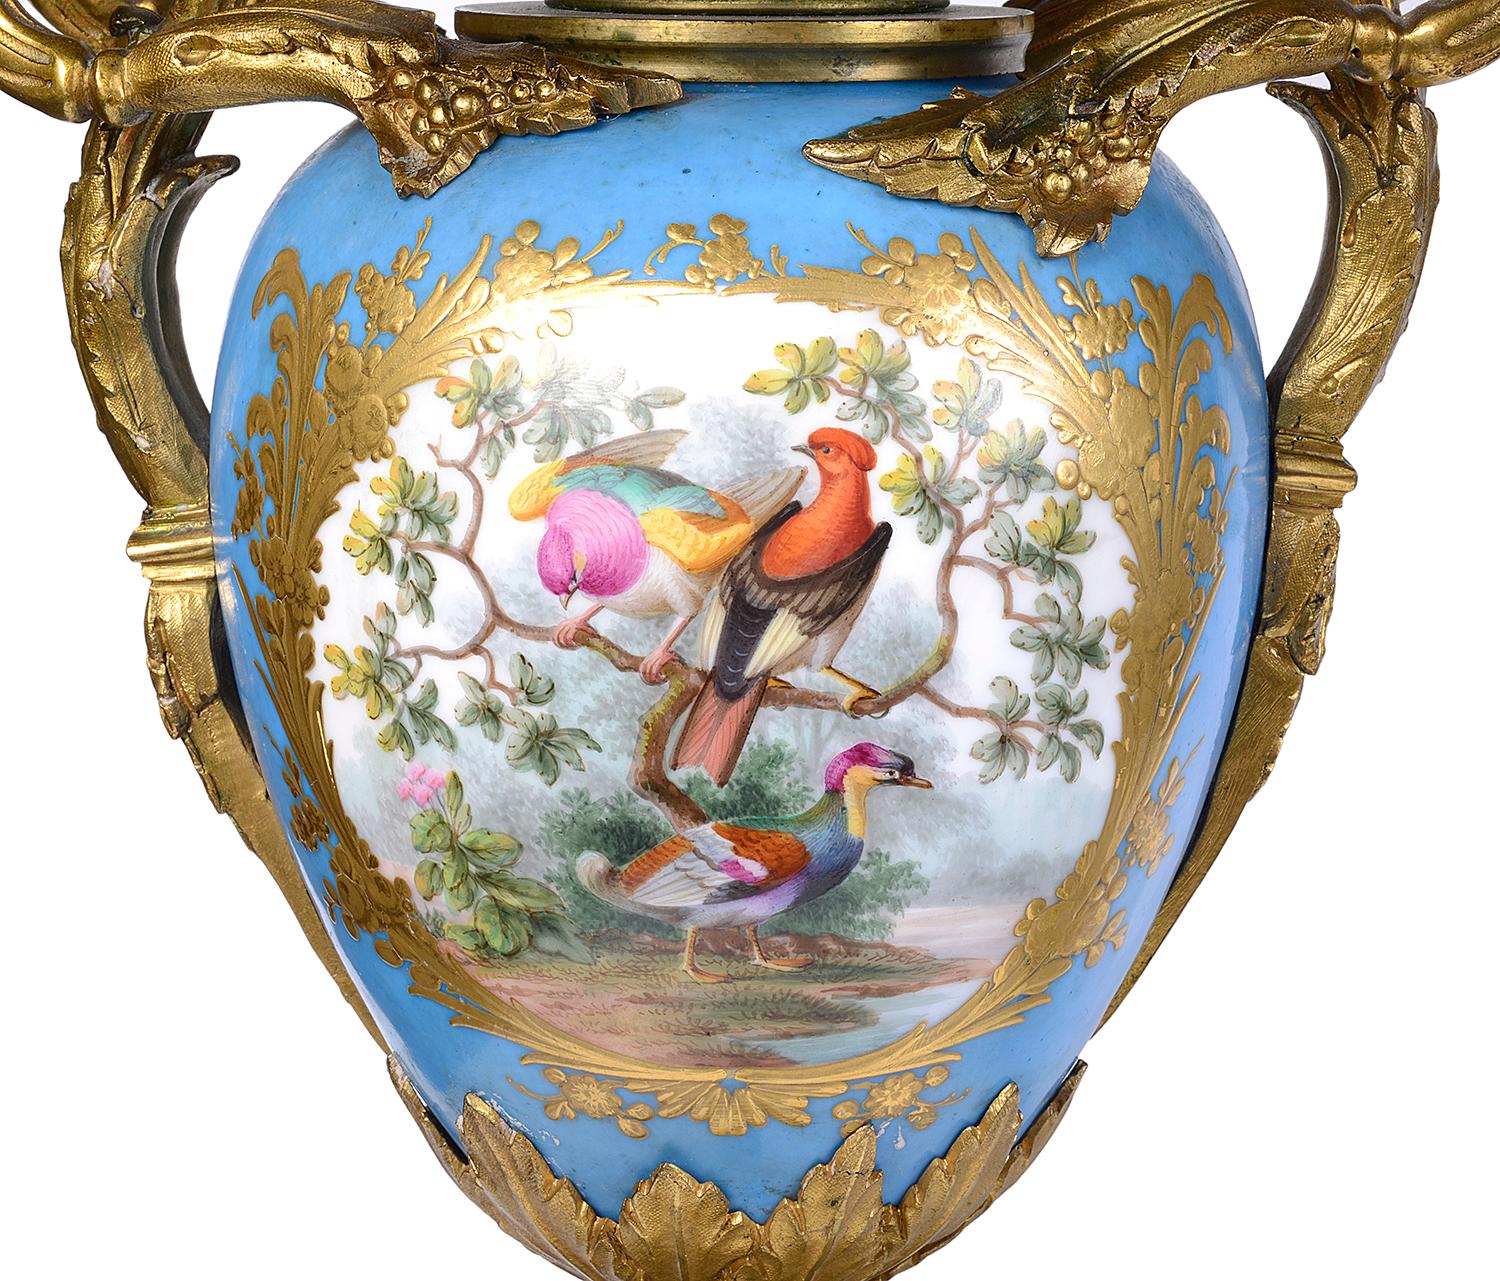 A very good quality pair of 19th century French Sevres style porcelain and gilded ormolu candelabra, each having five scrolling foliate branch sconces coming off the turquoise ground porcelain, with painted central panels depicting exotic birds in